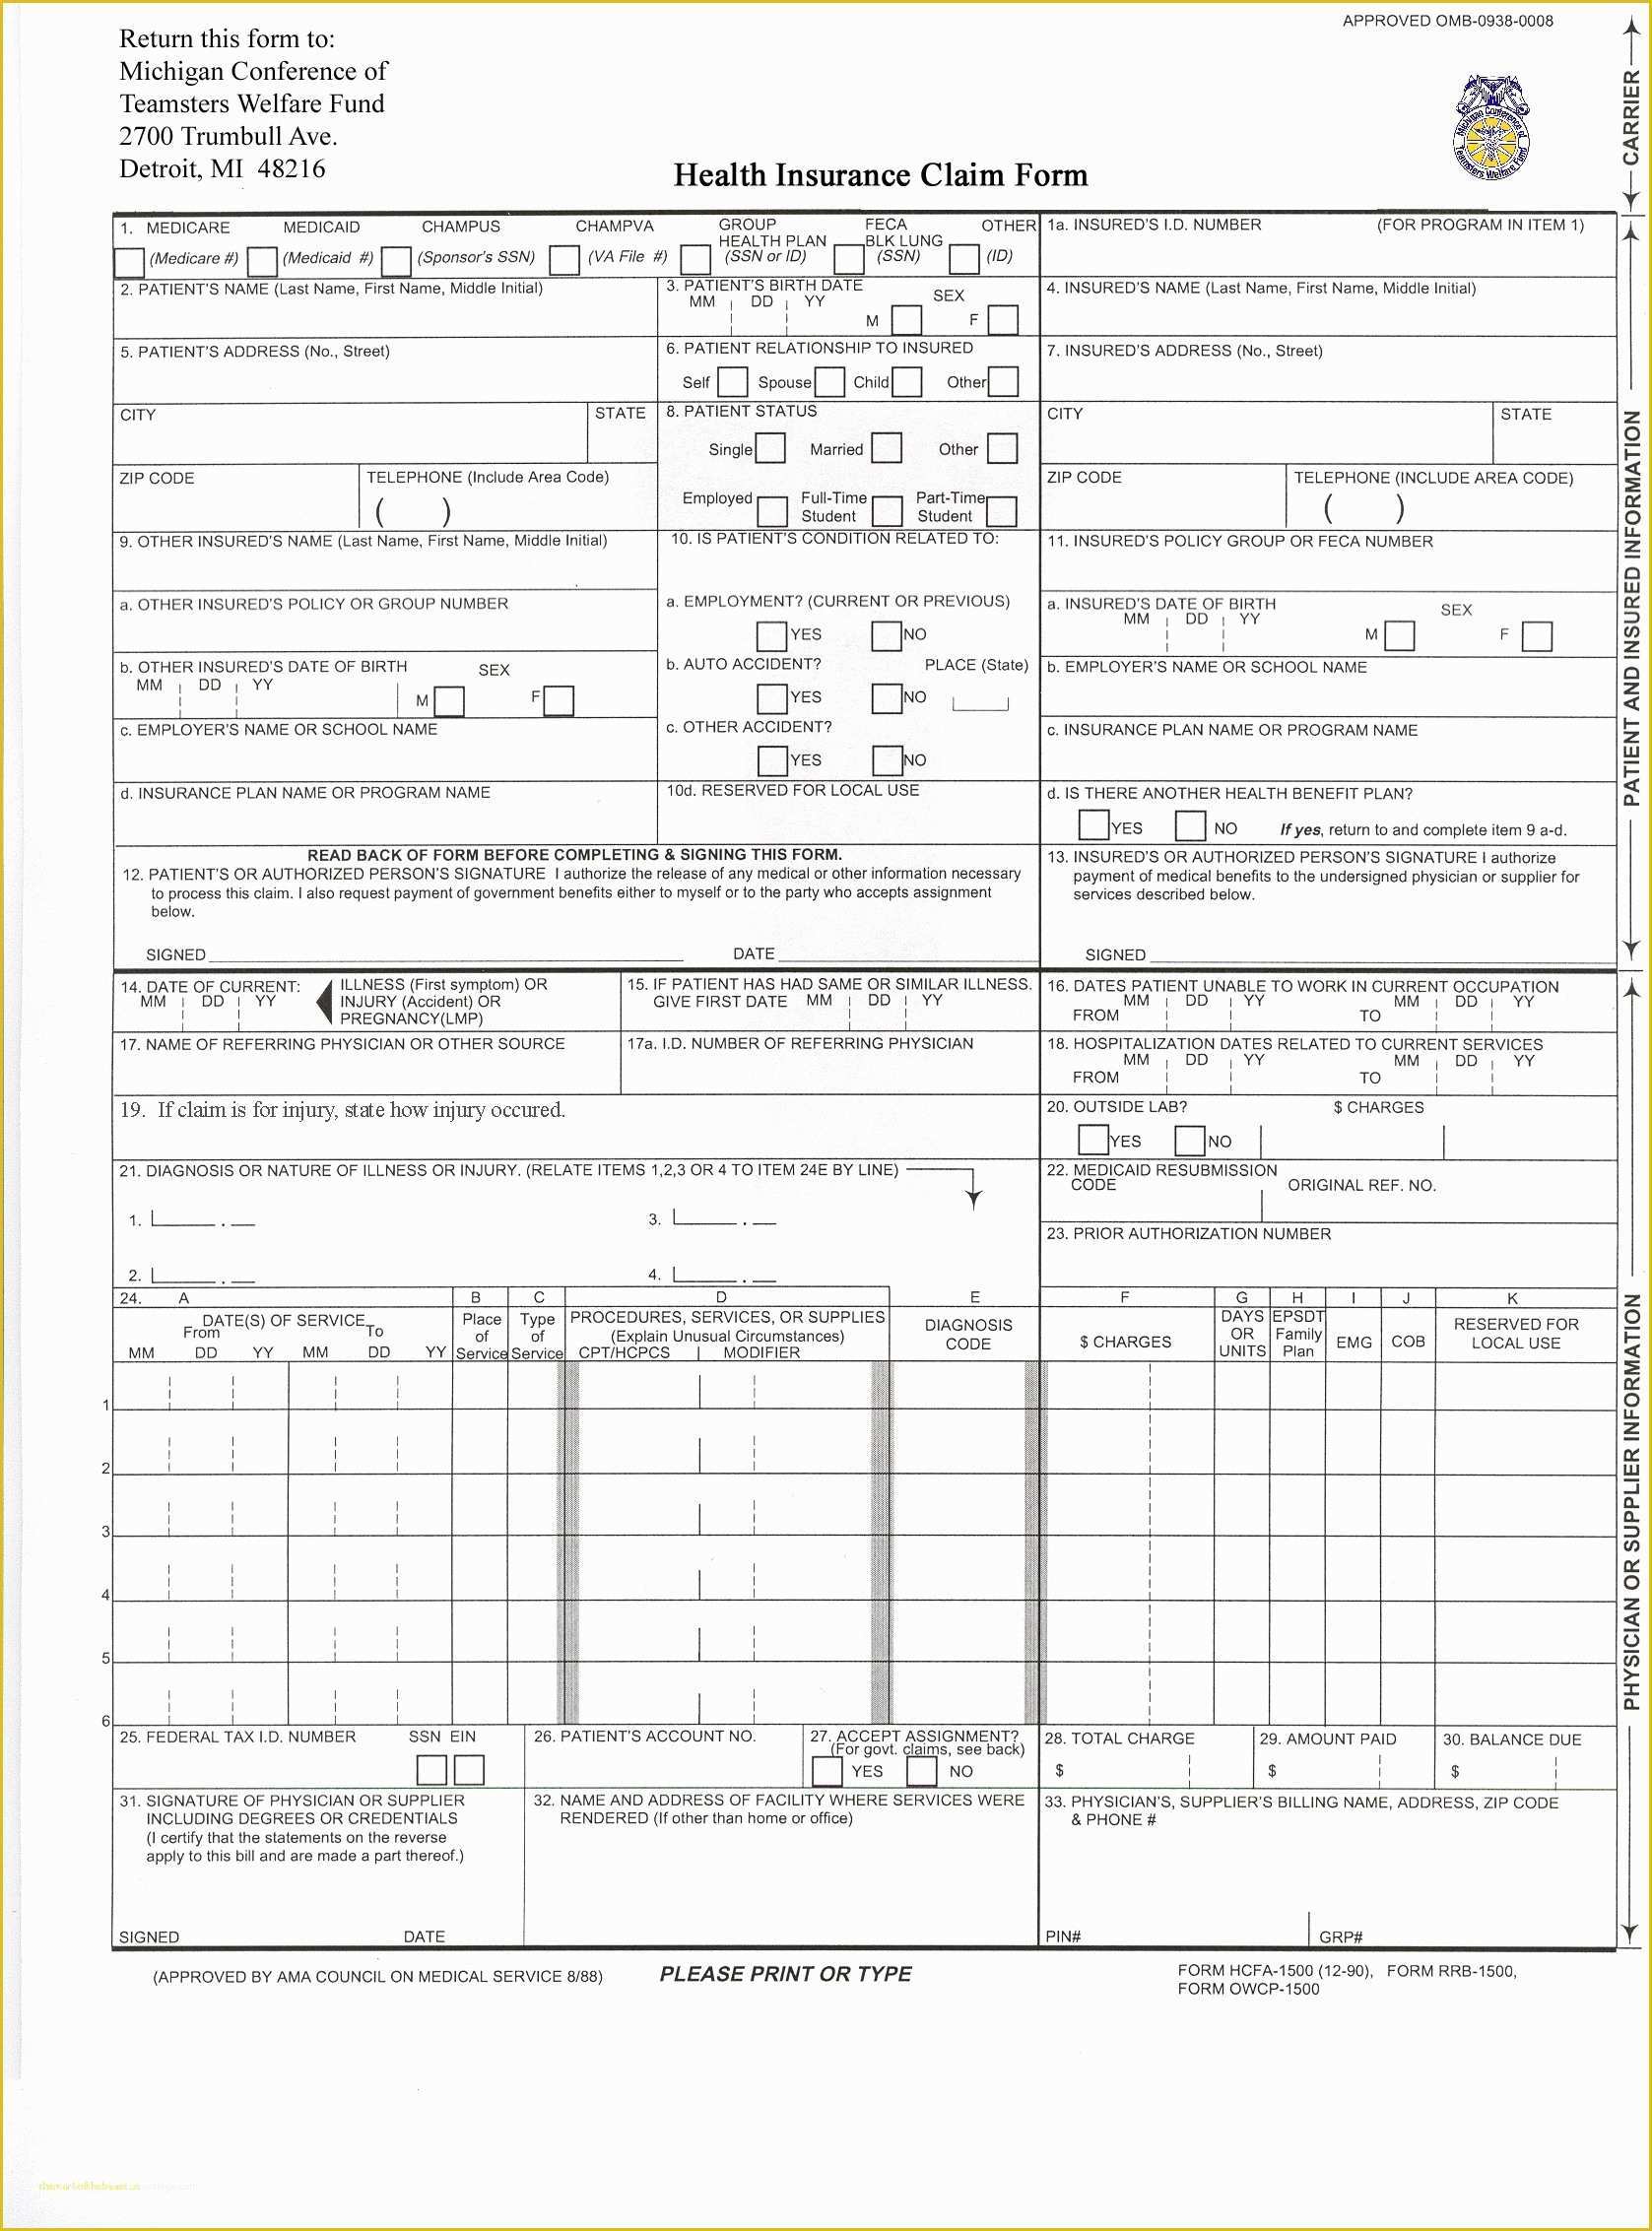 Cms 1500 Form Printable Free Printable Forms Free Online